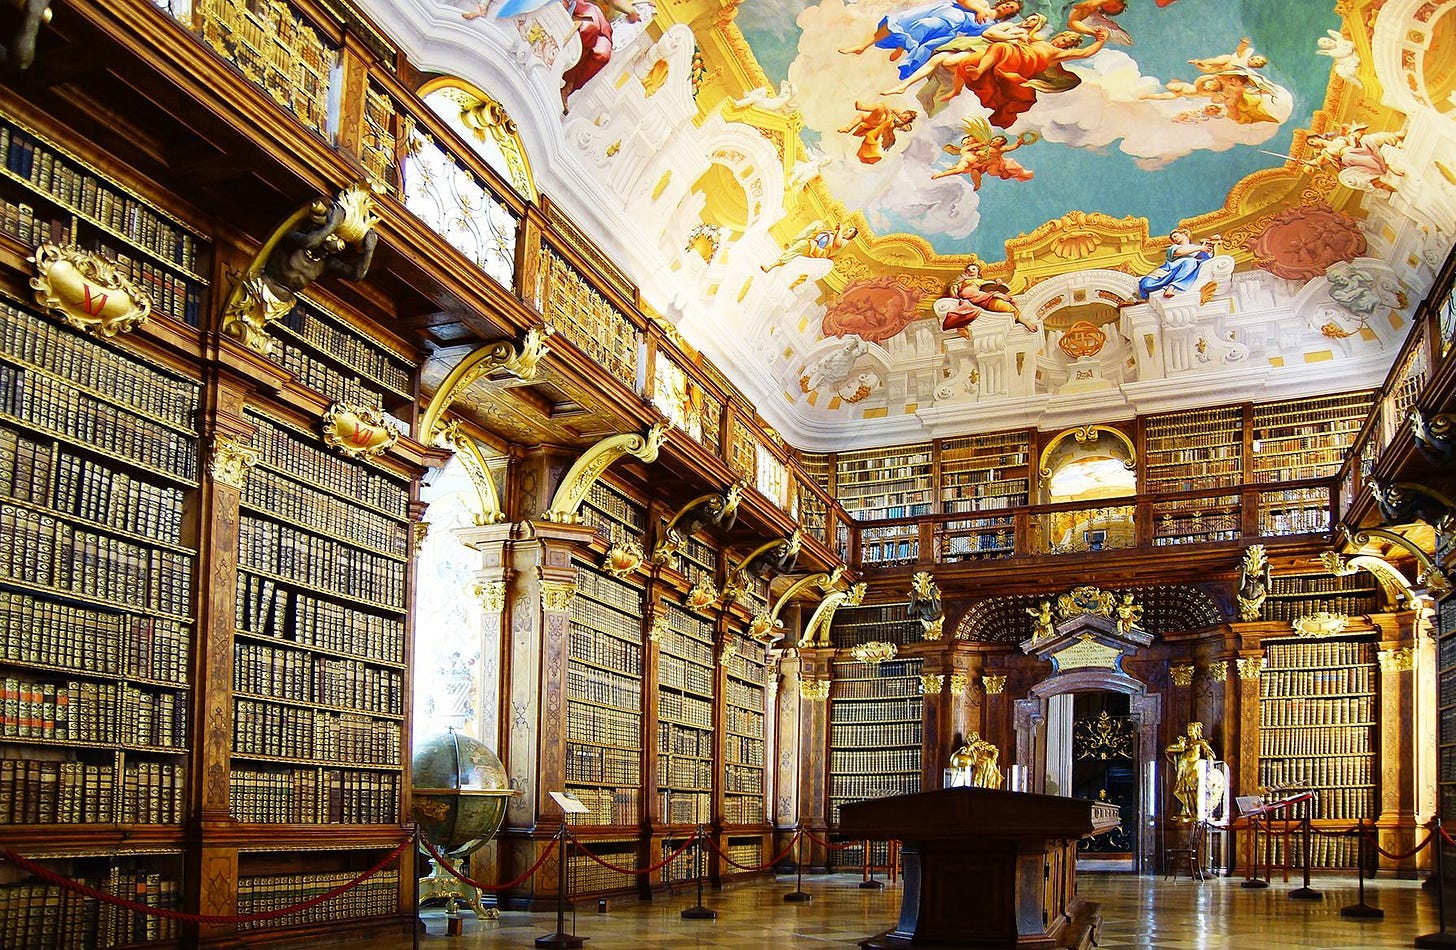 The Most Beautiful Libraries in the World | Slideshow | The Active Times